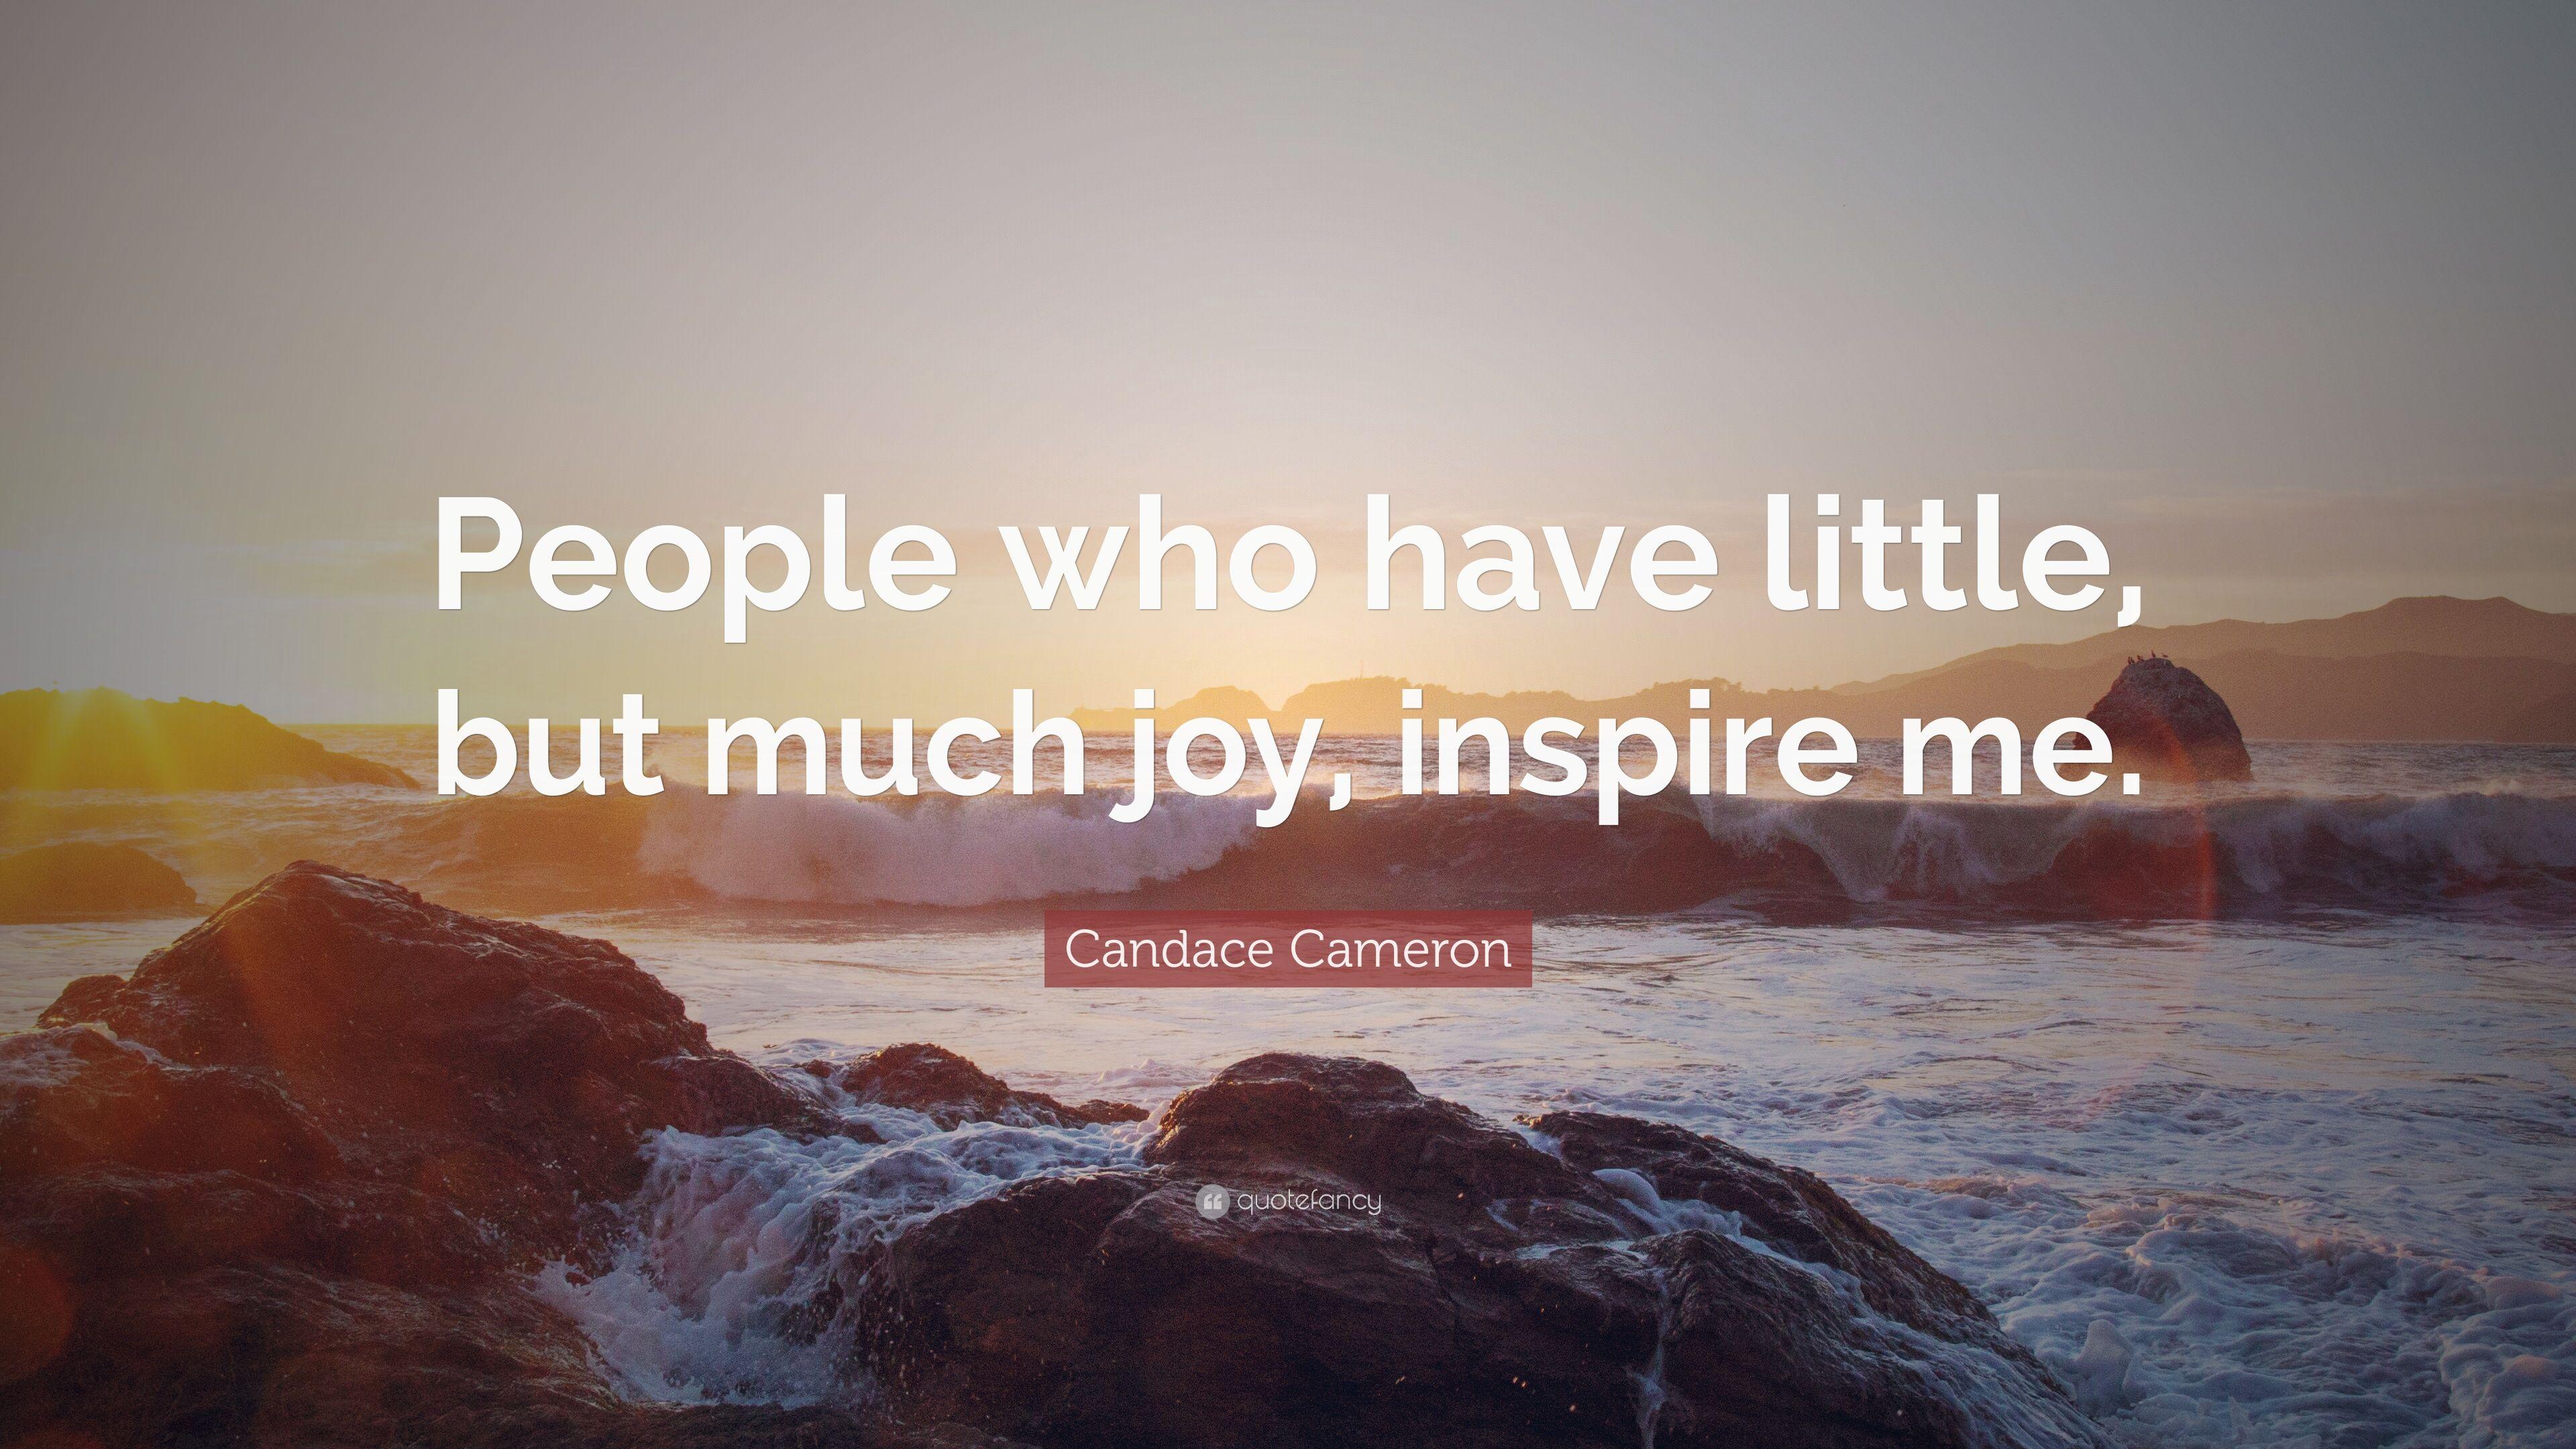 Candace Cameron Quote: “People who have little, but much joy